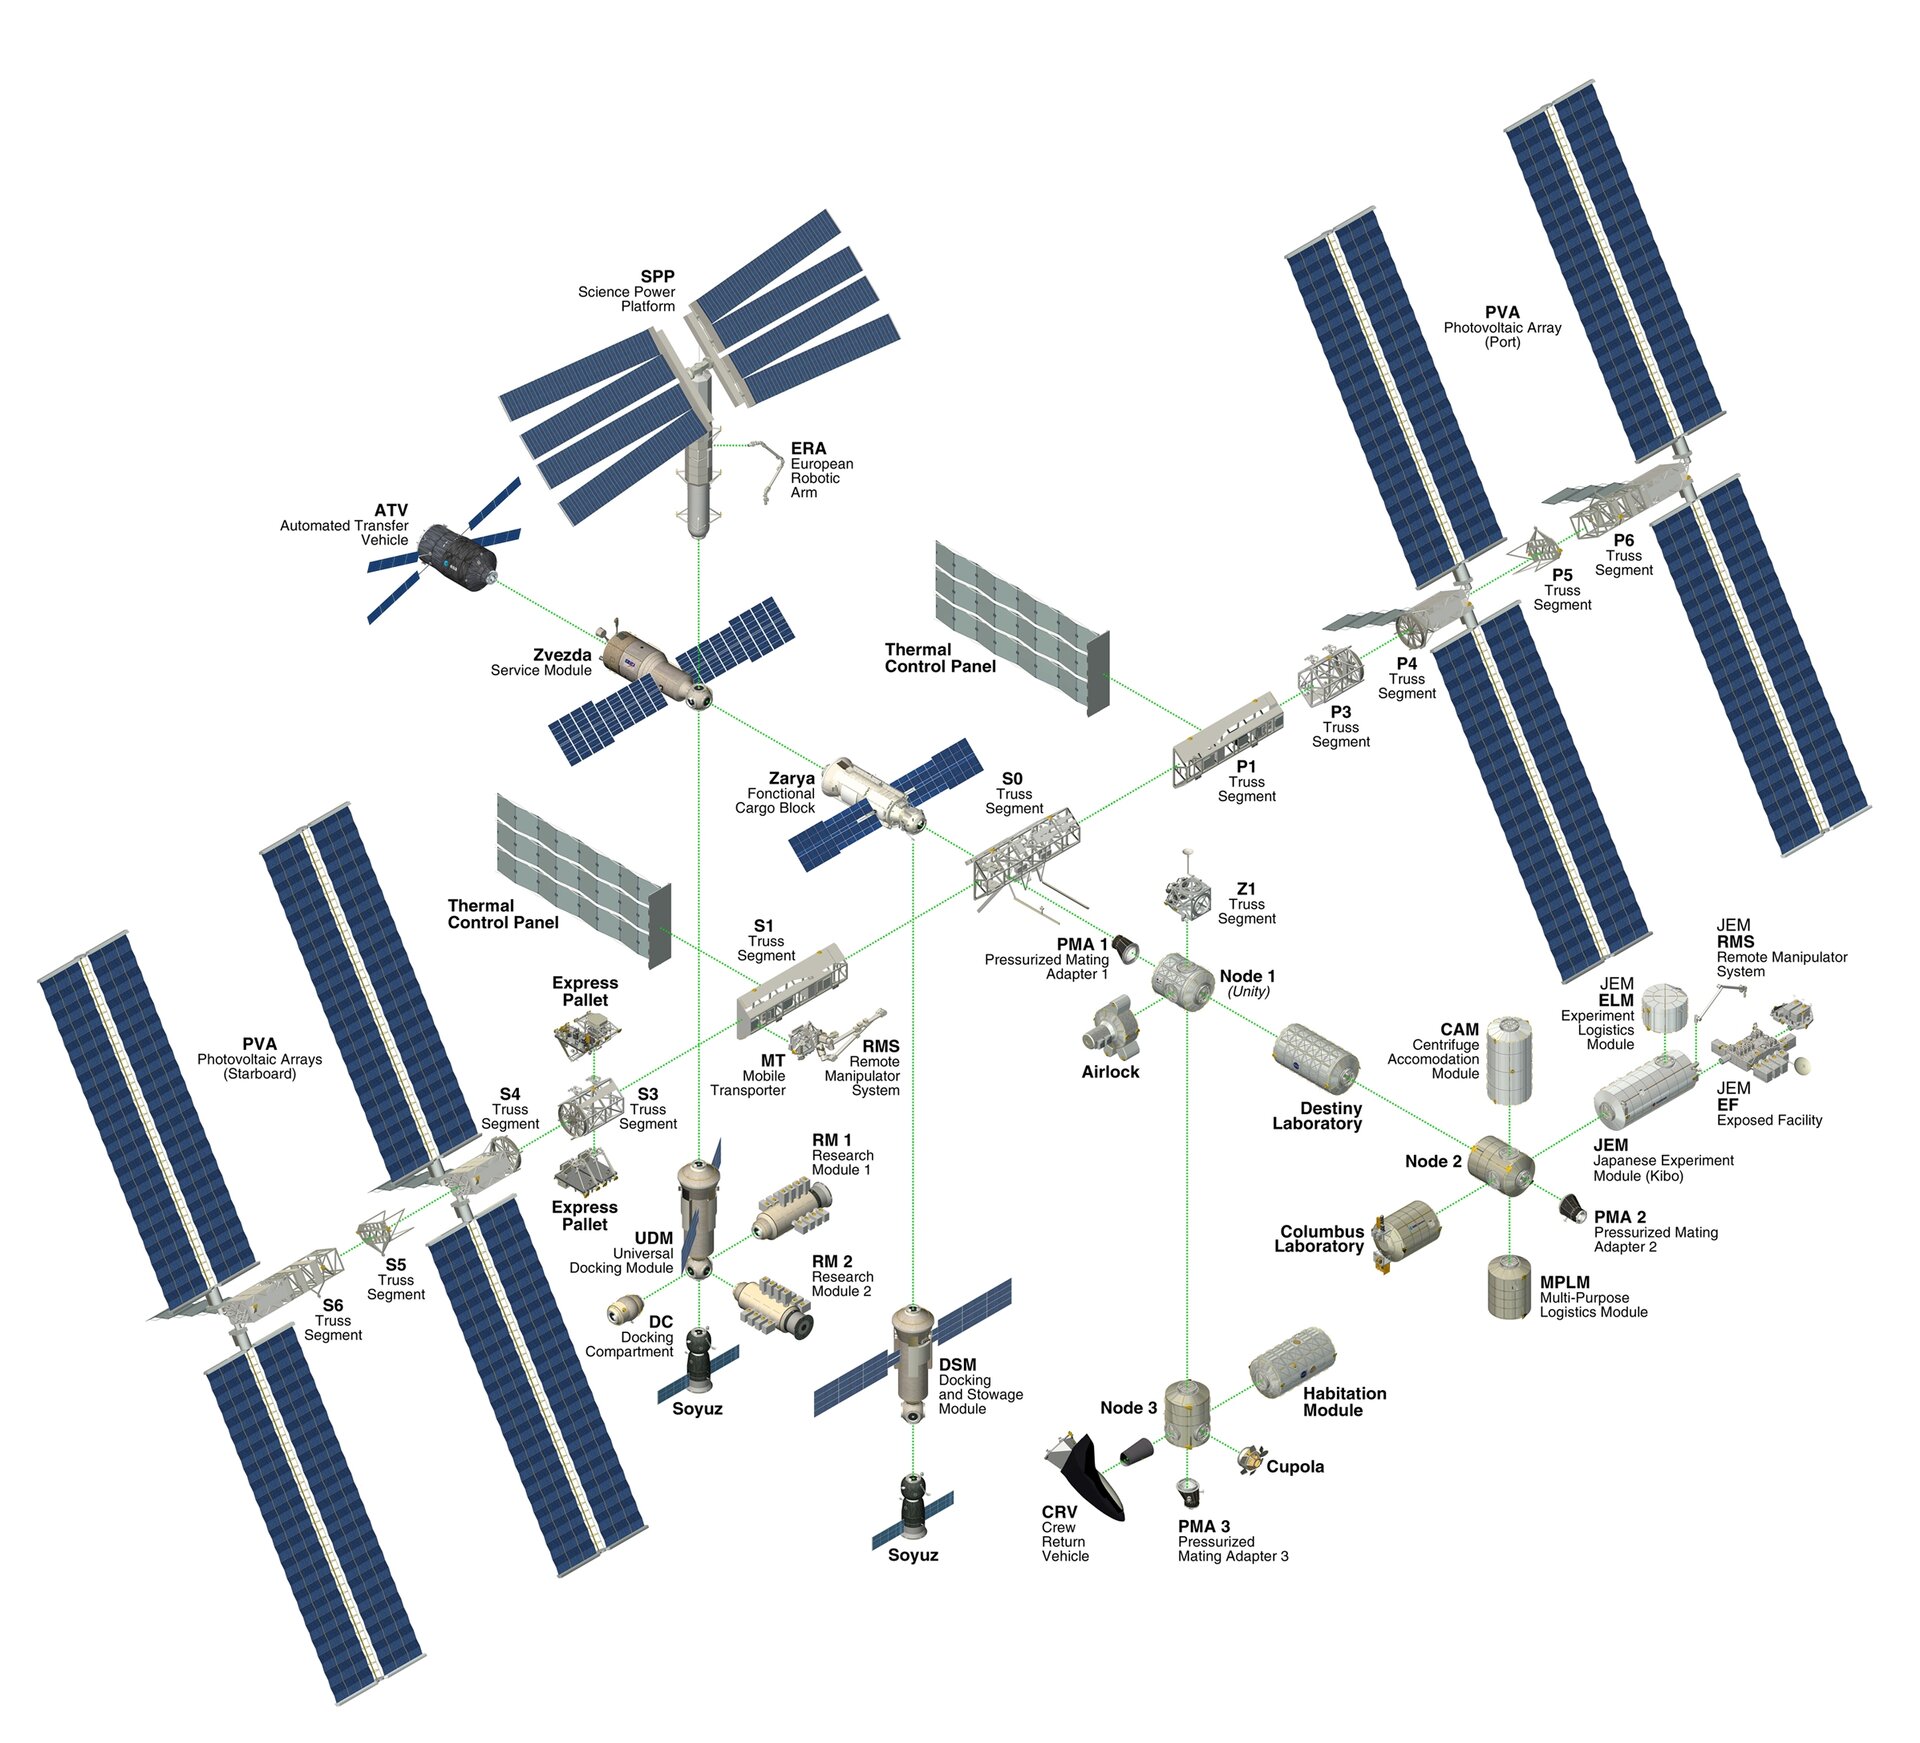 The International Space Station - Exploded View